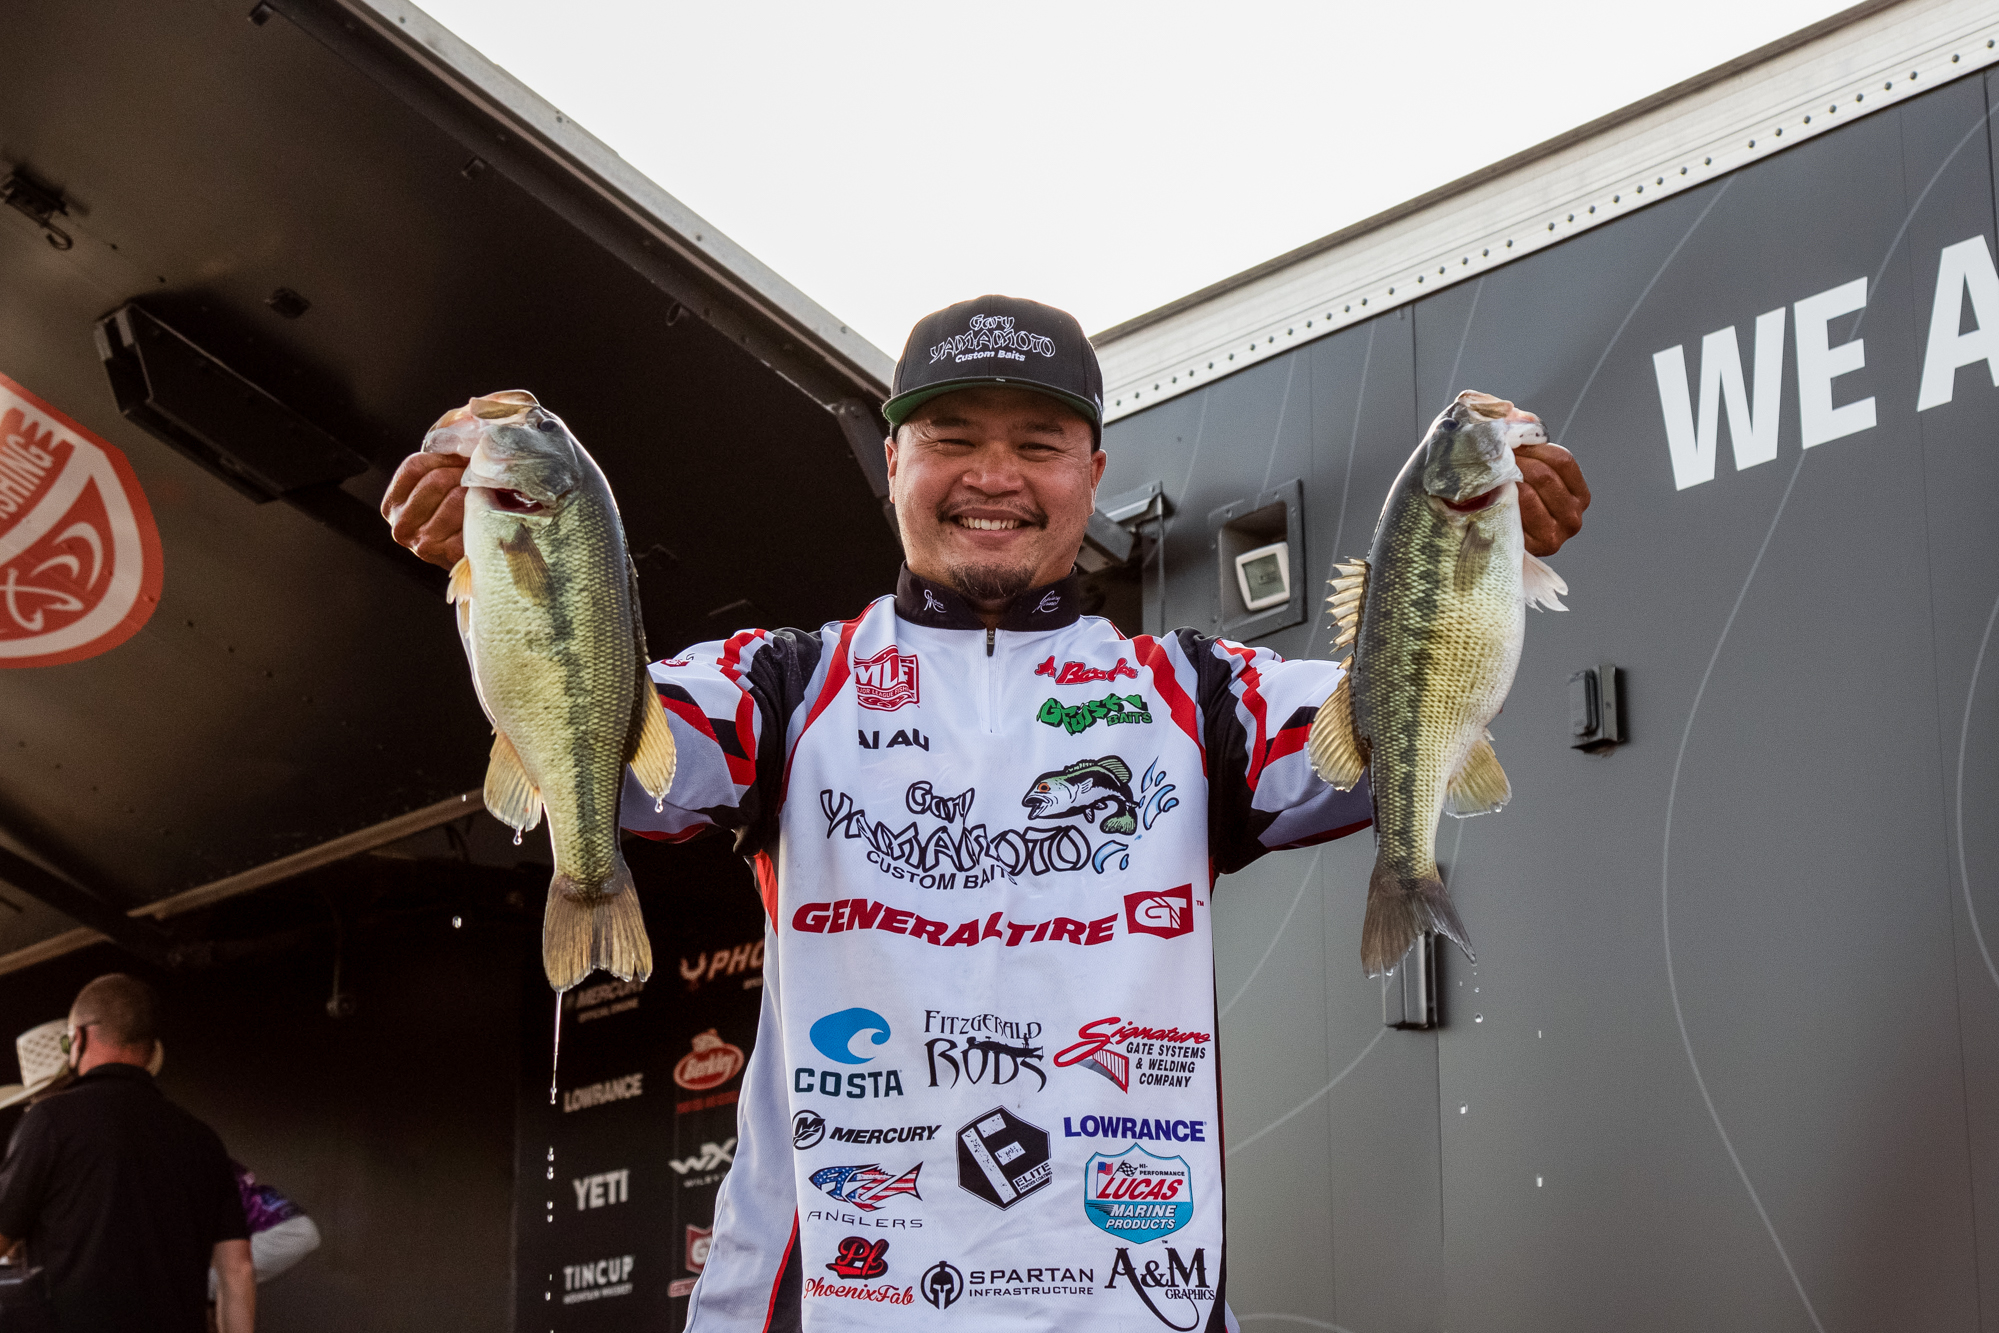 Top 5 Patterns from Smith Lake - Day 2 - Major League Fishing